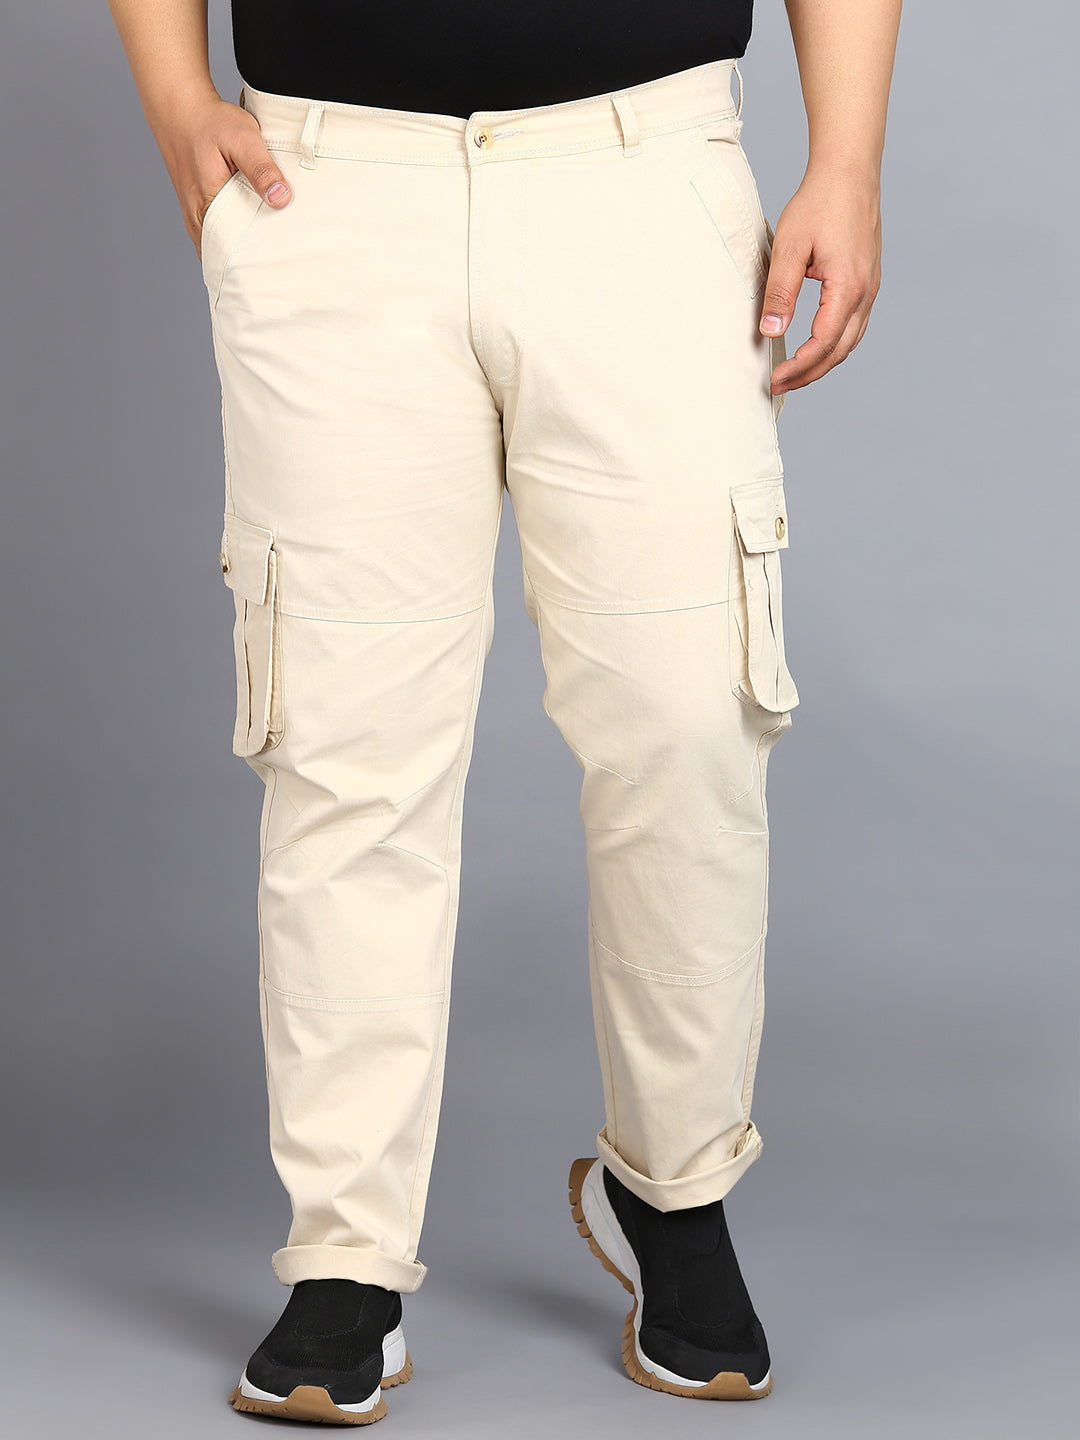 Plus Men's Cream Regular Fit Solid Cargo Chino Pant with 6 Pockets